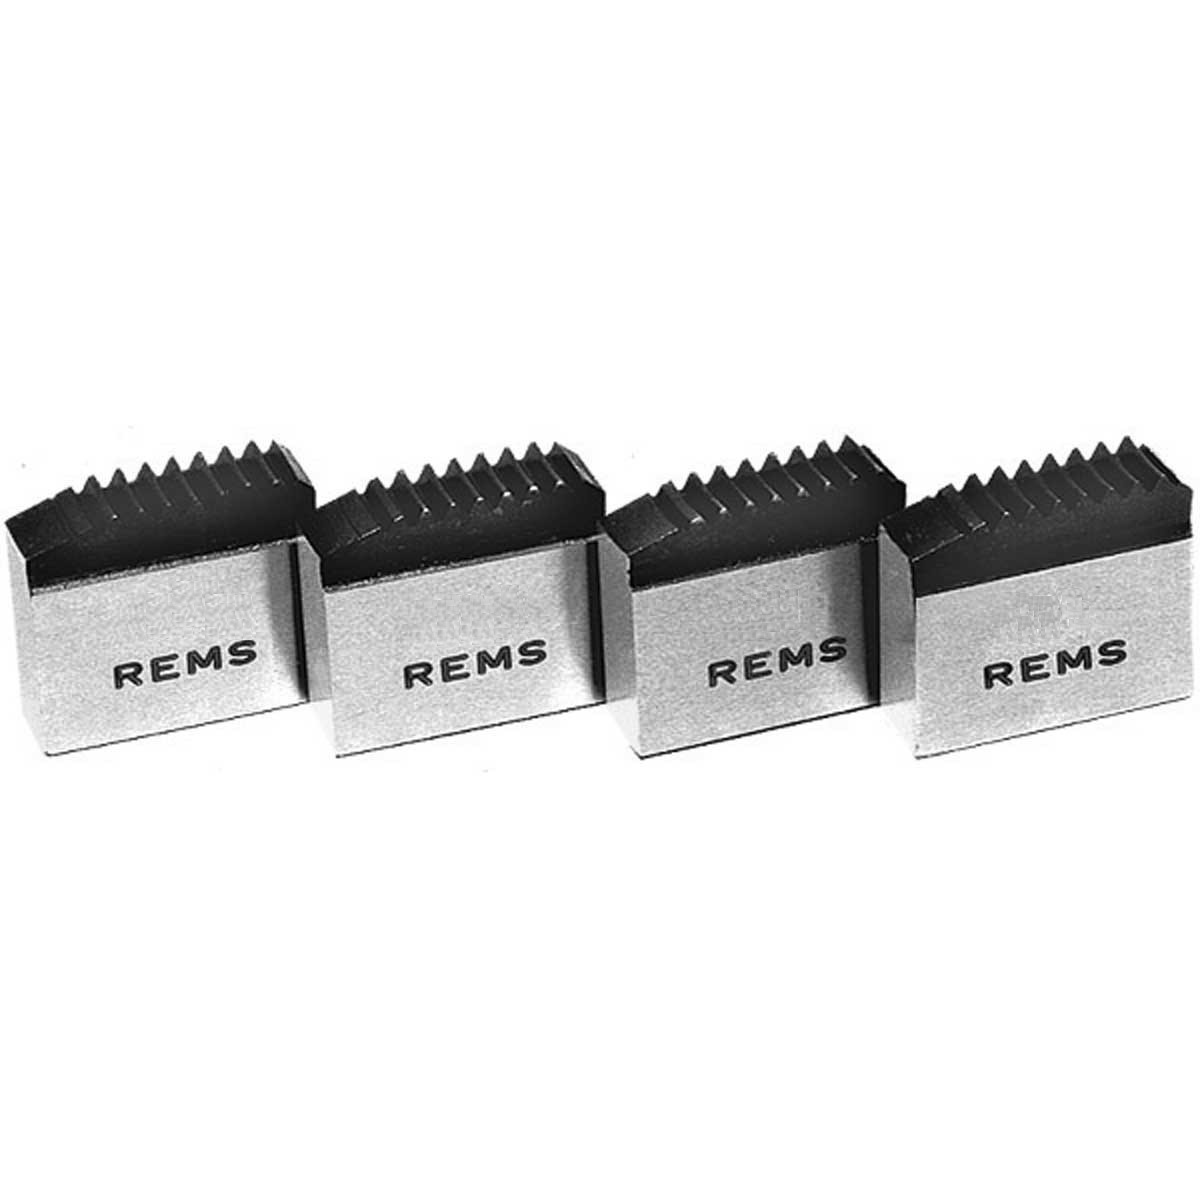 REMS - 3/4" Replacement Die Set, 521242